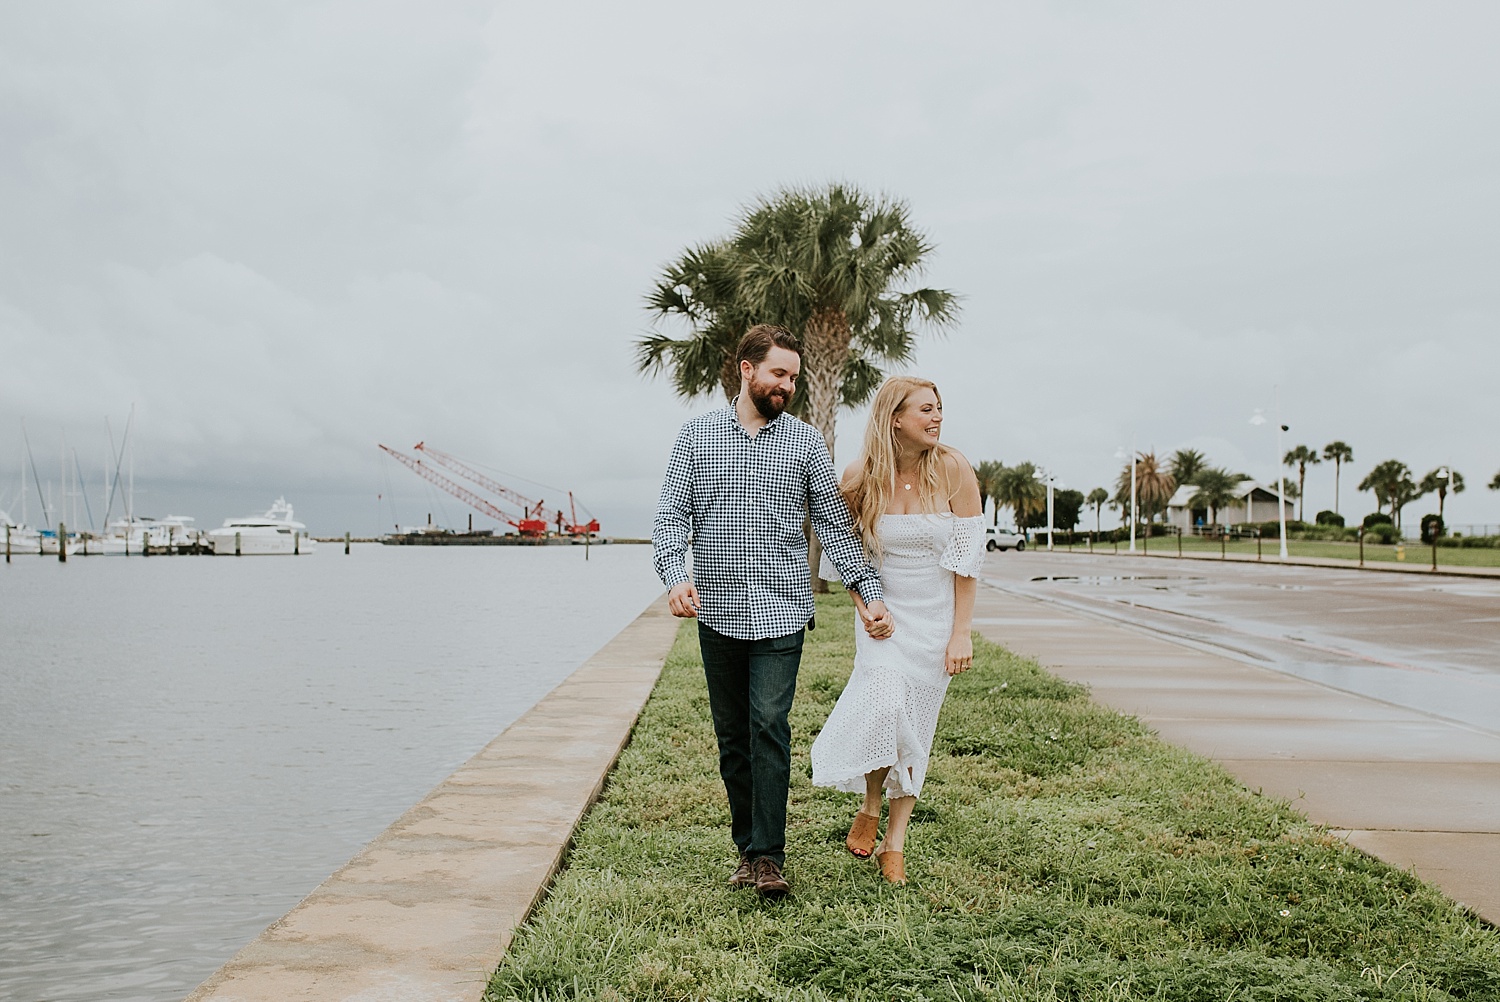 ts engagement photos, wild roots st Pete, wild roots engagement session, ashley izquierdo, st Pete engagement photos, st Pete engagement ideas, tampa engagement photos, tampa engagement ideas, nursery engagement ideas, plant engagement photos, hipster engagement pictures, tampa engagement photographers, tampa wedding photographers, st Petersburg engagement photos, st Petersburg photographers